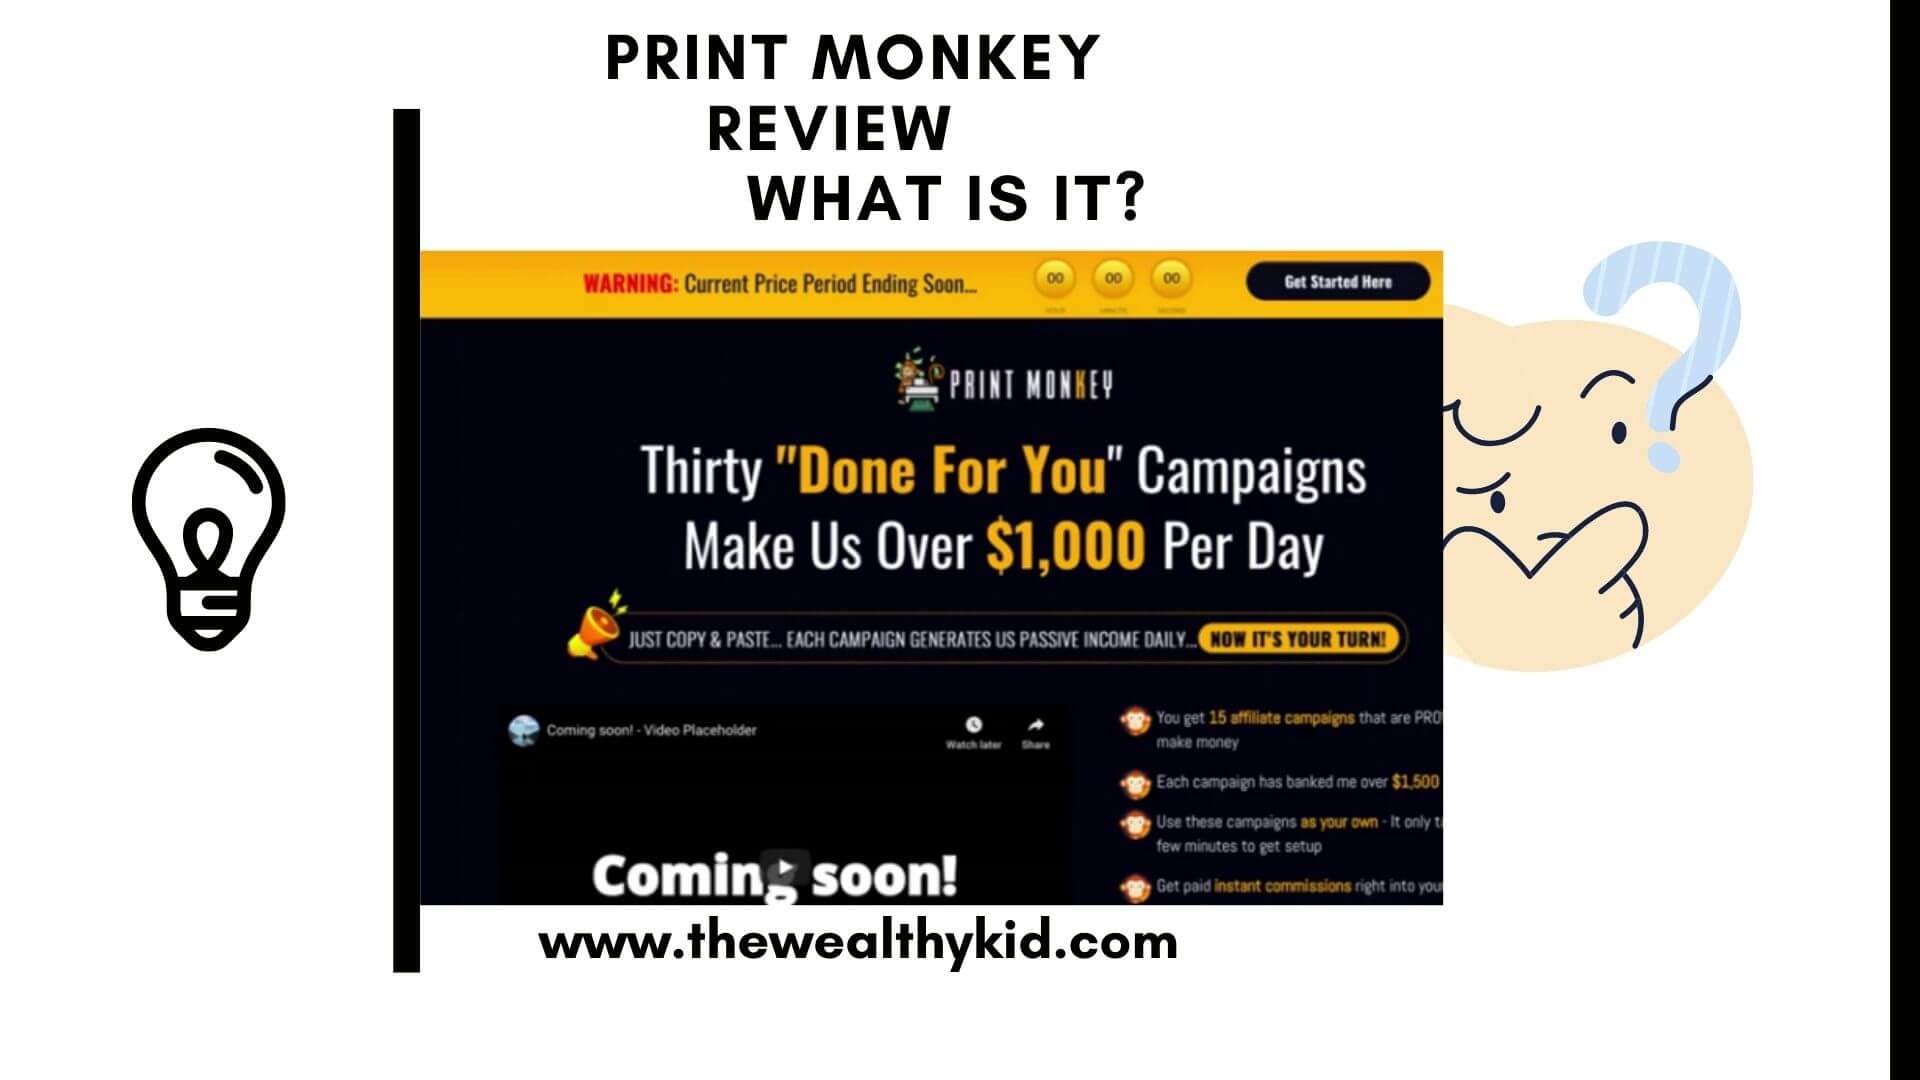 What is Print Monkey About? It’s A Waste Of Money!